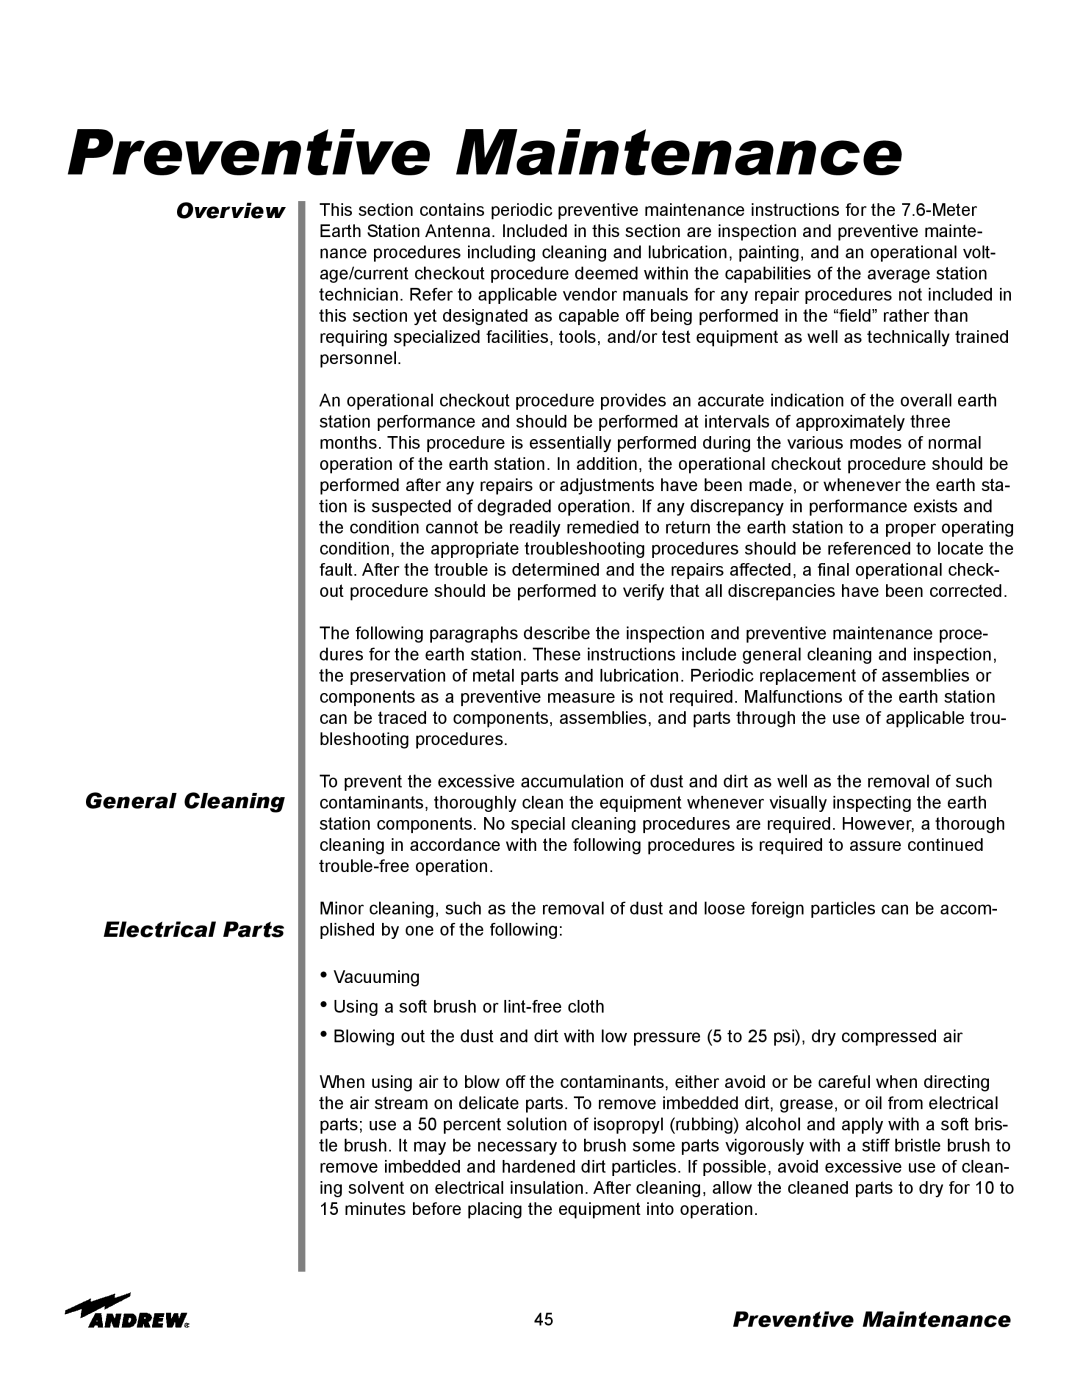 Andrew ES76PK-1 installation instructions Preventive Maintenance, Overview General Cleaning Electrical Parts 